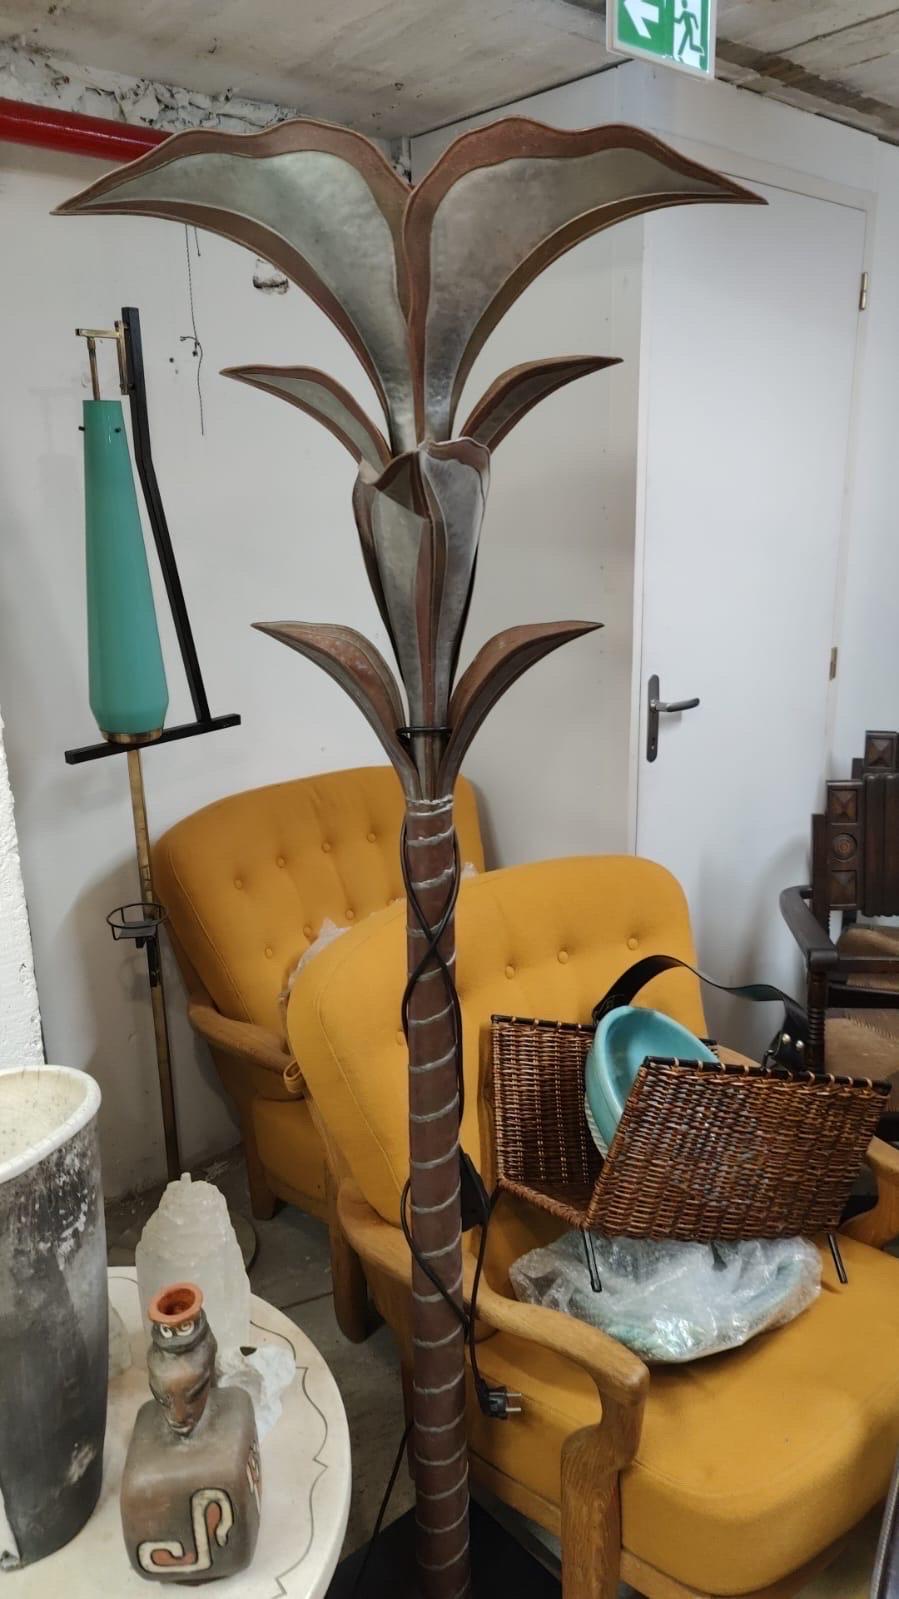 This floor lamp was done by the artist Henri Fernandez and manufactured by Maison Honore in the seventies